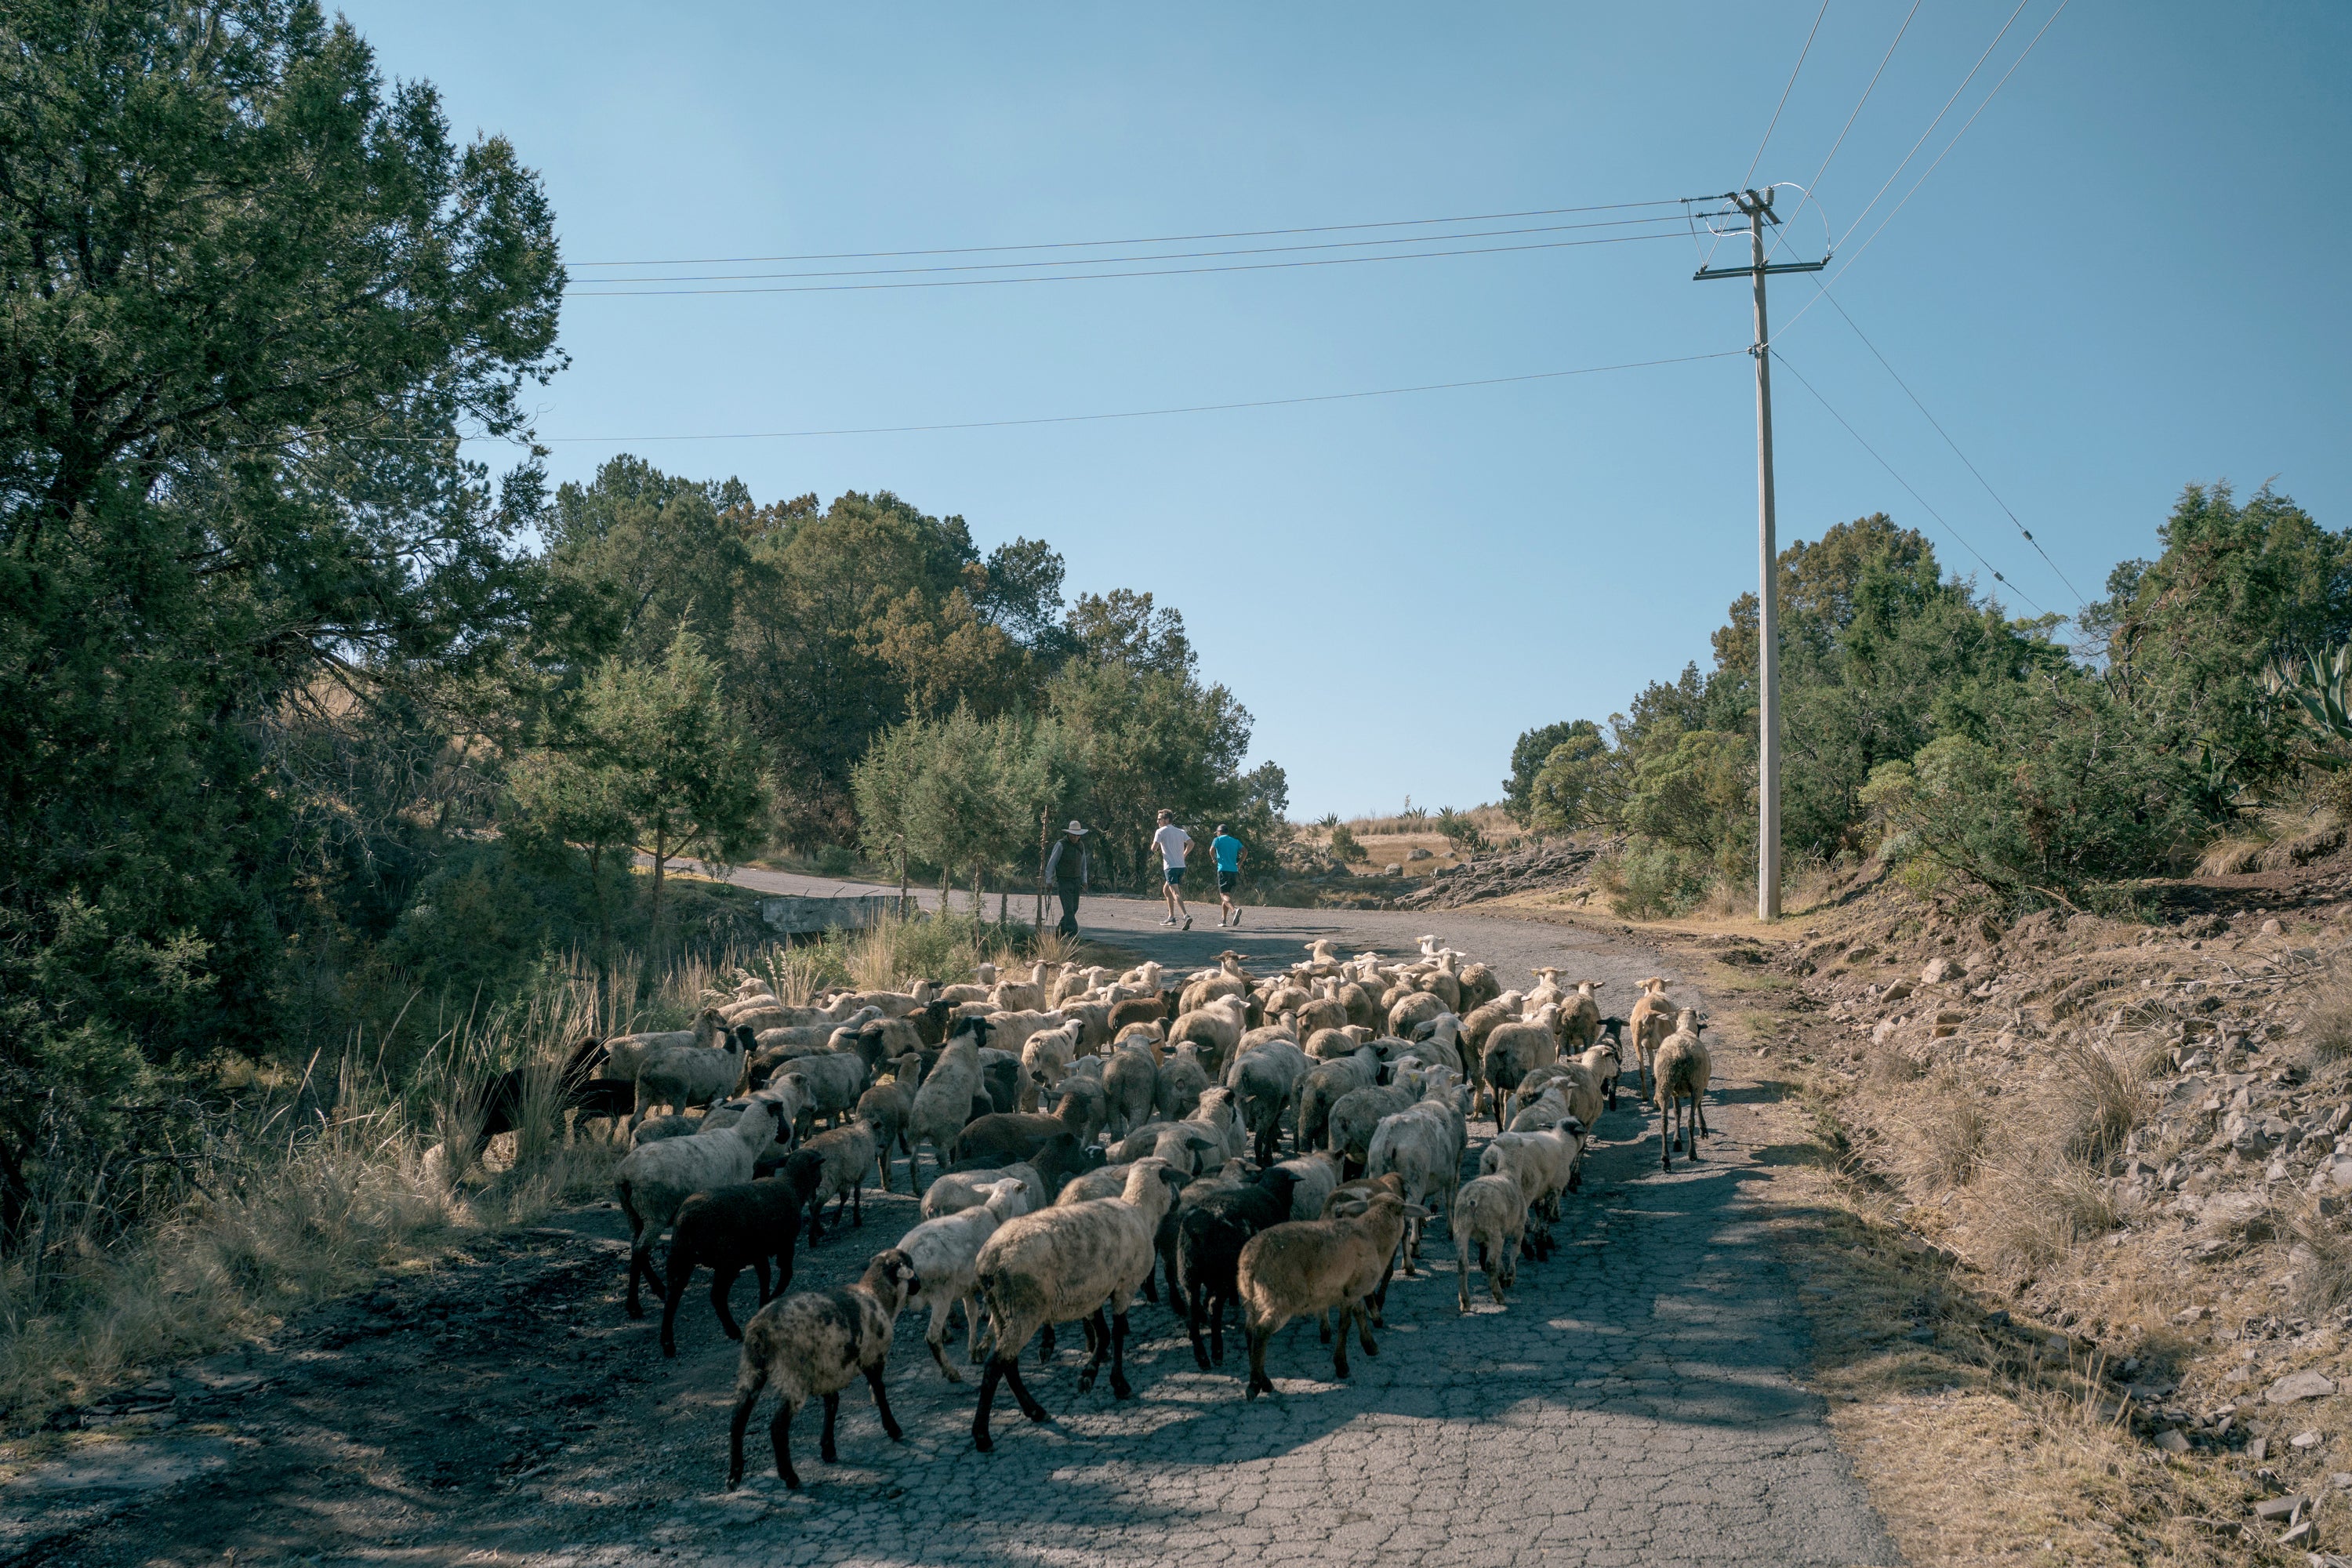 The author (left) and Silva run uphill while a flock of sheep cross the road